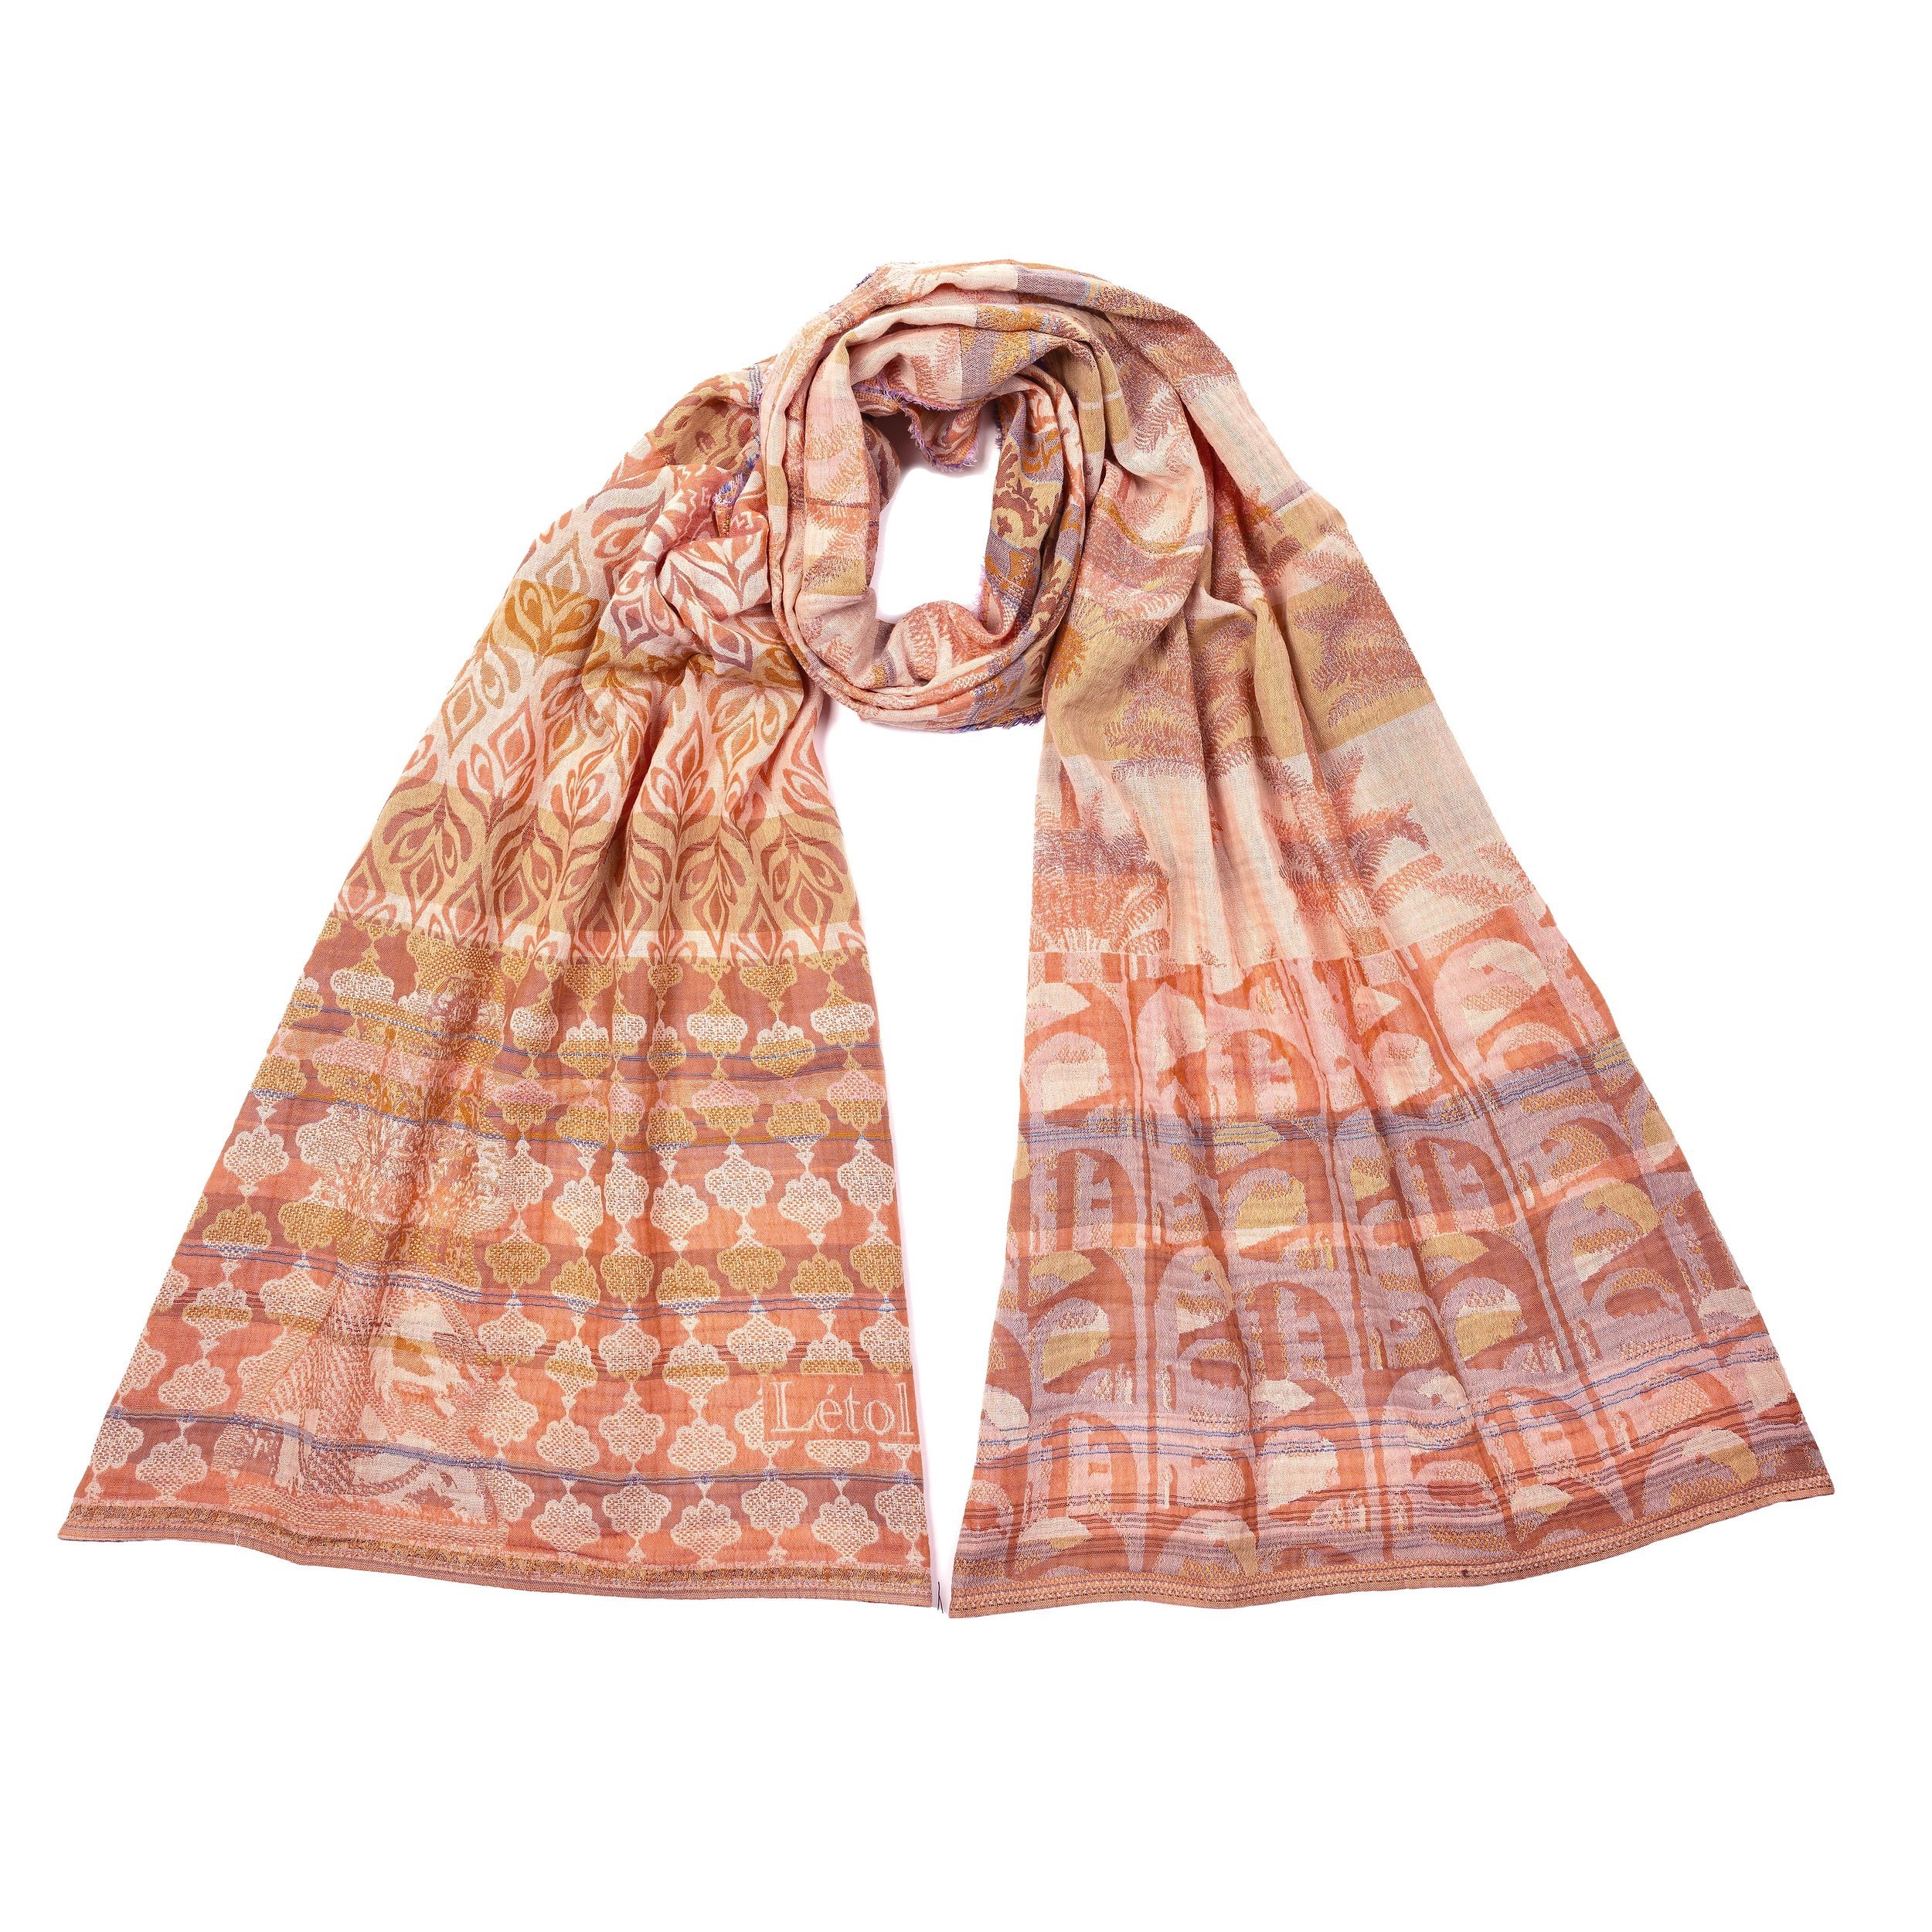 Letol Organic Cotton French Scarf Amira 901 Boudoir in Dusty Pink and other Colors AM901